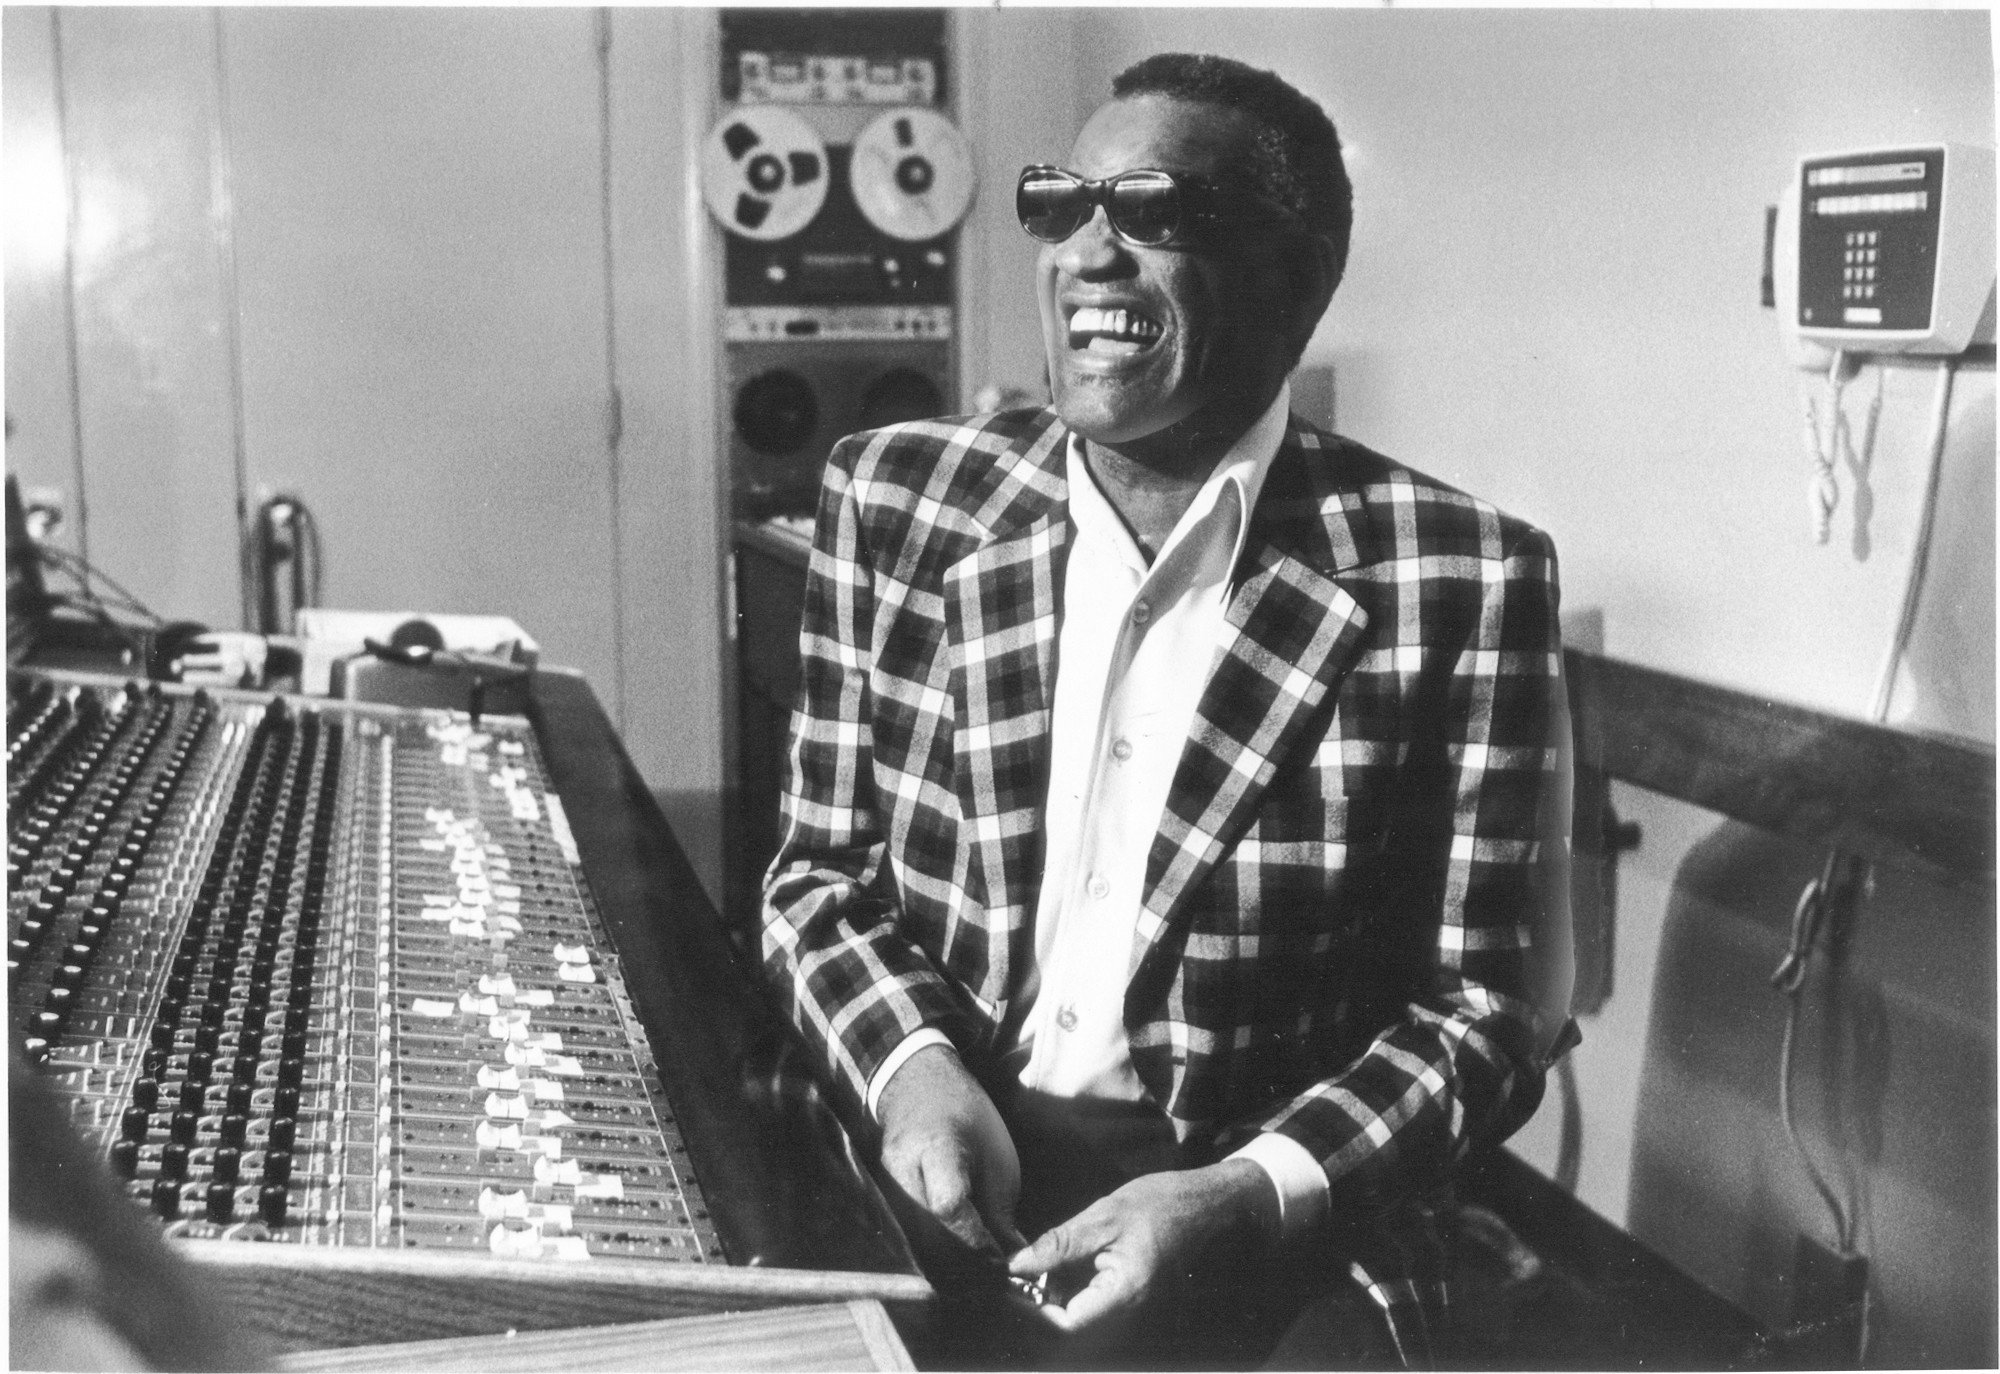 Happy Birthday to Ray Charles, who would have turned 87 today! 